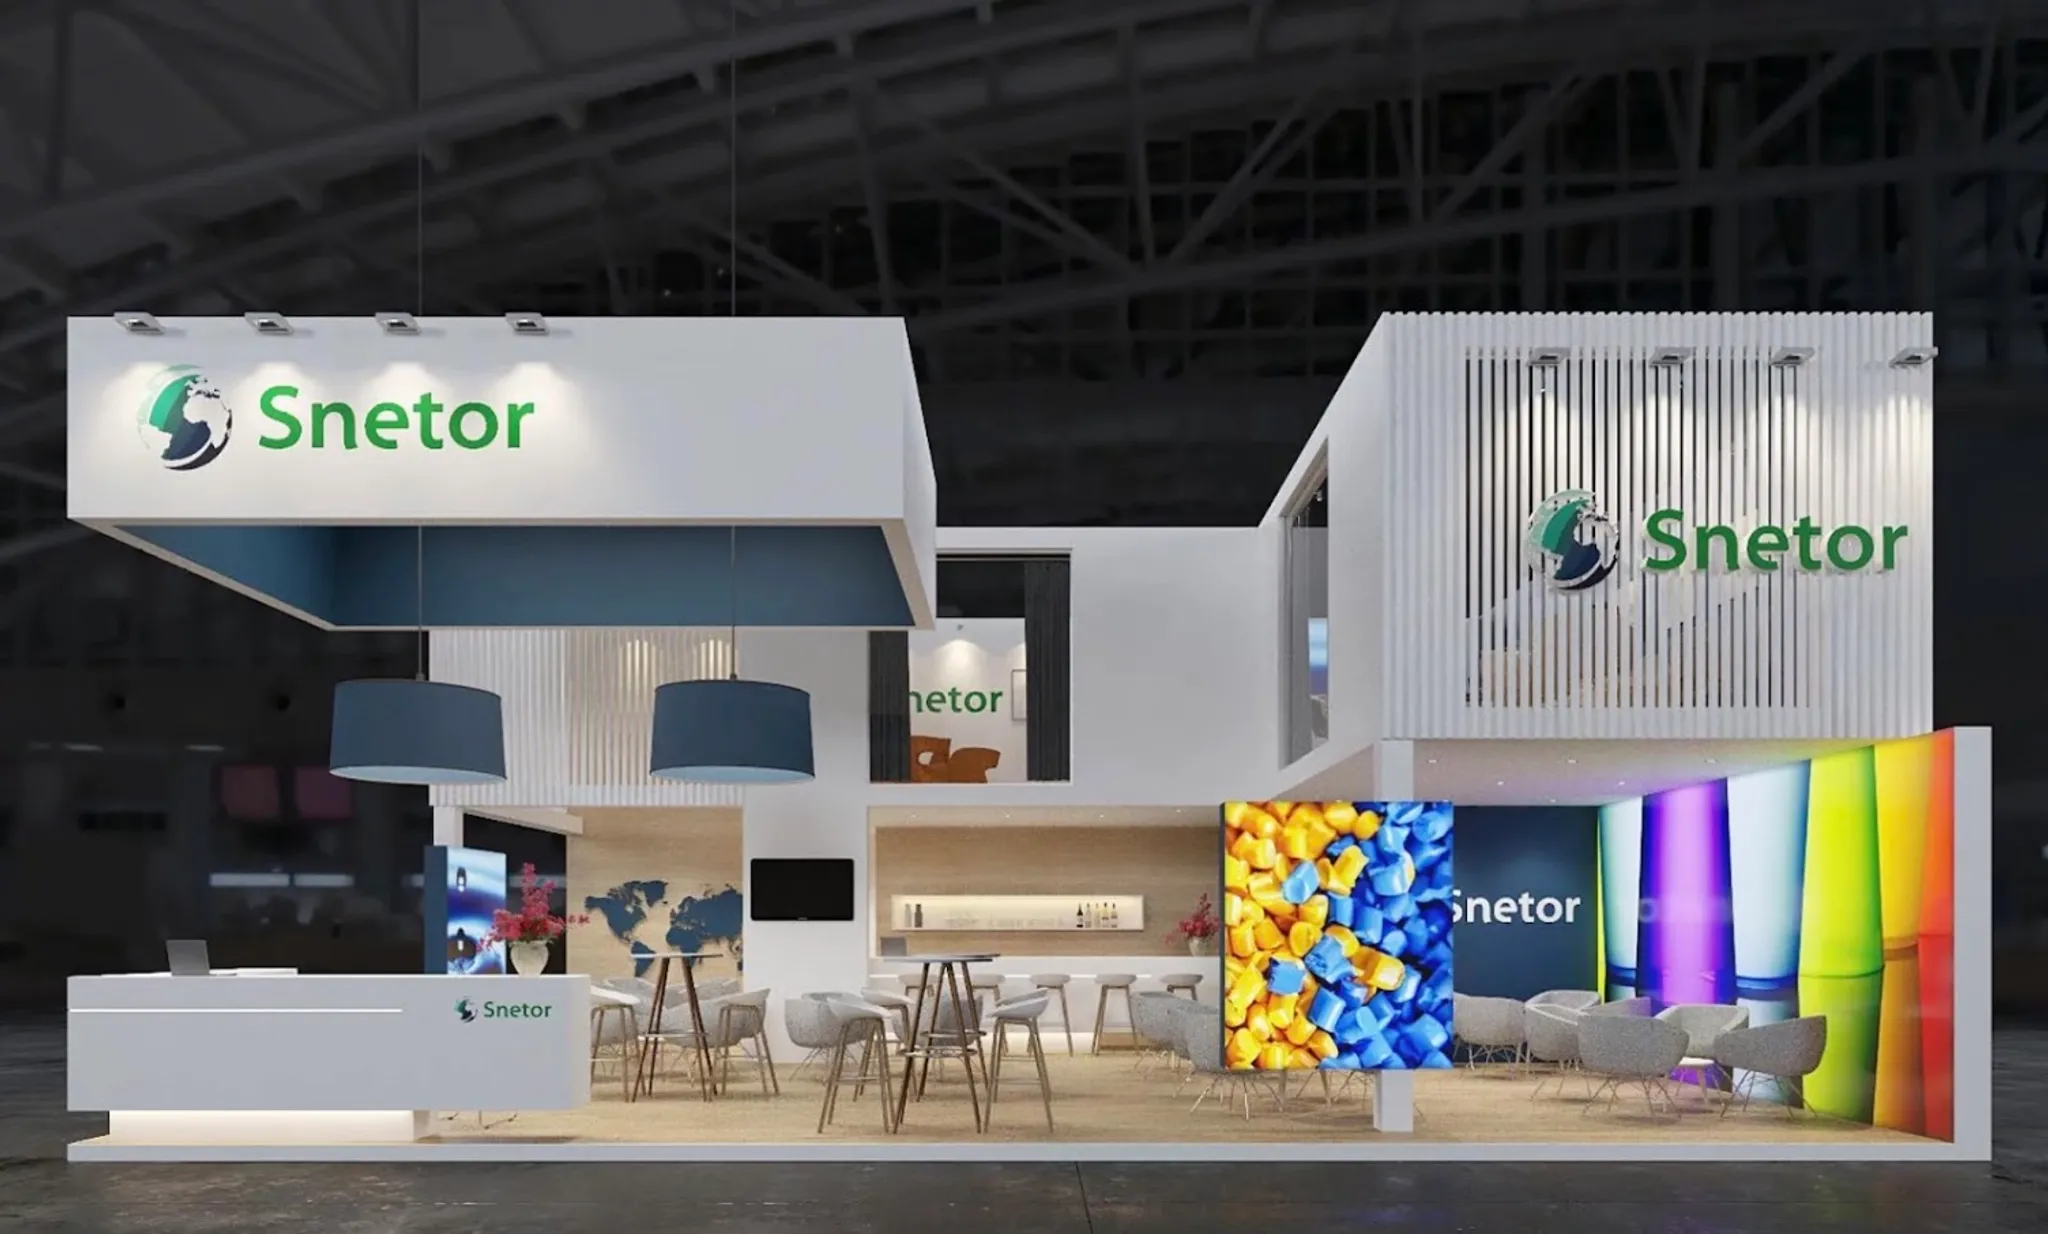 /images/2022-04-01-french-booth-builder/trade-show-booth-arc_typ-1